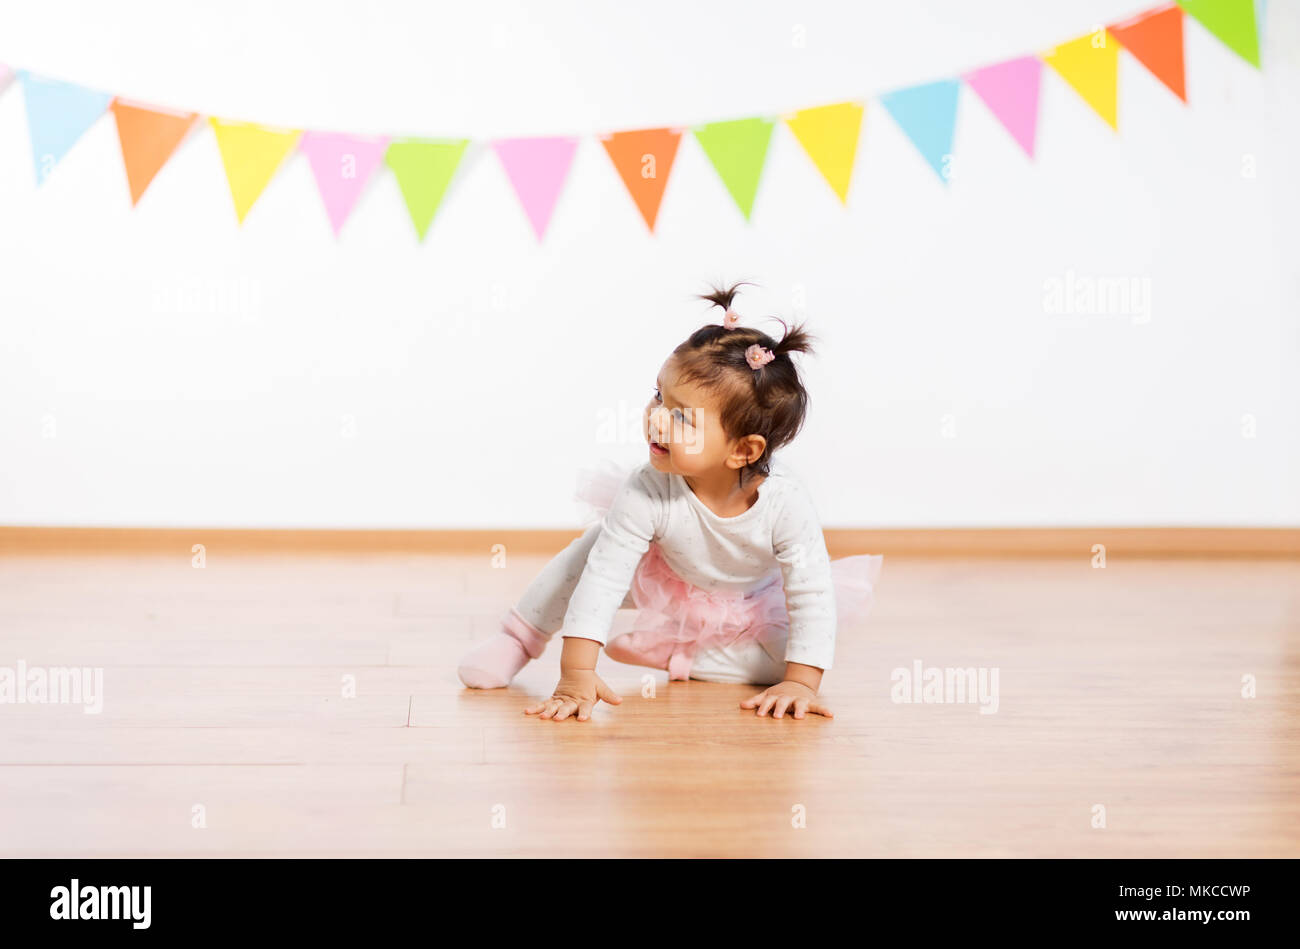 Happy baby girl on Birthday party Banque D'Images